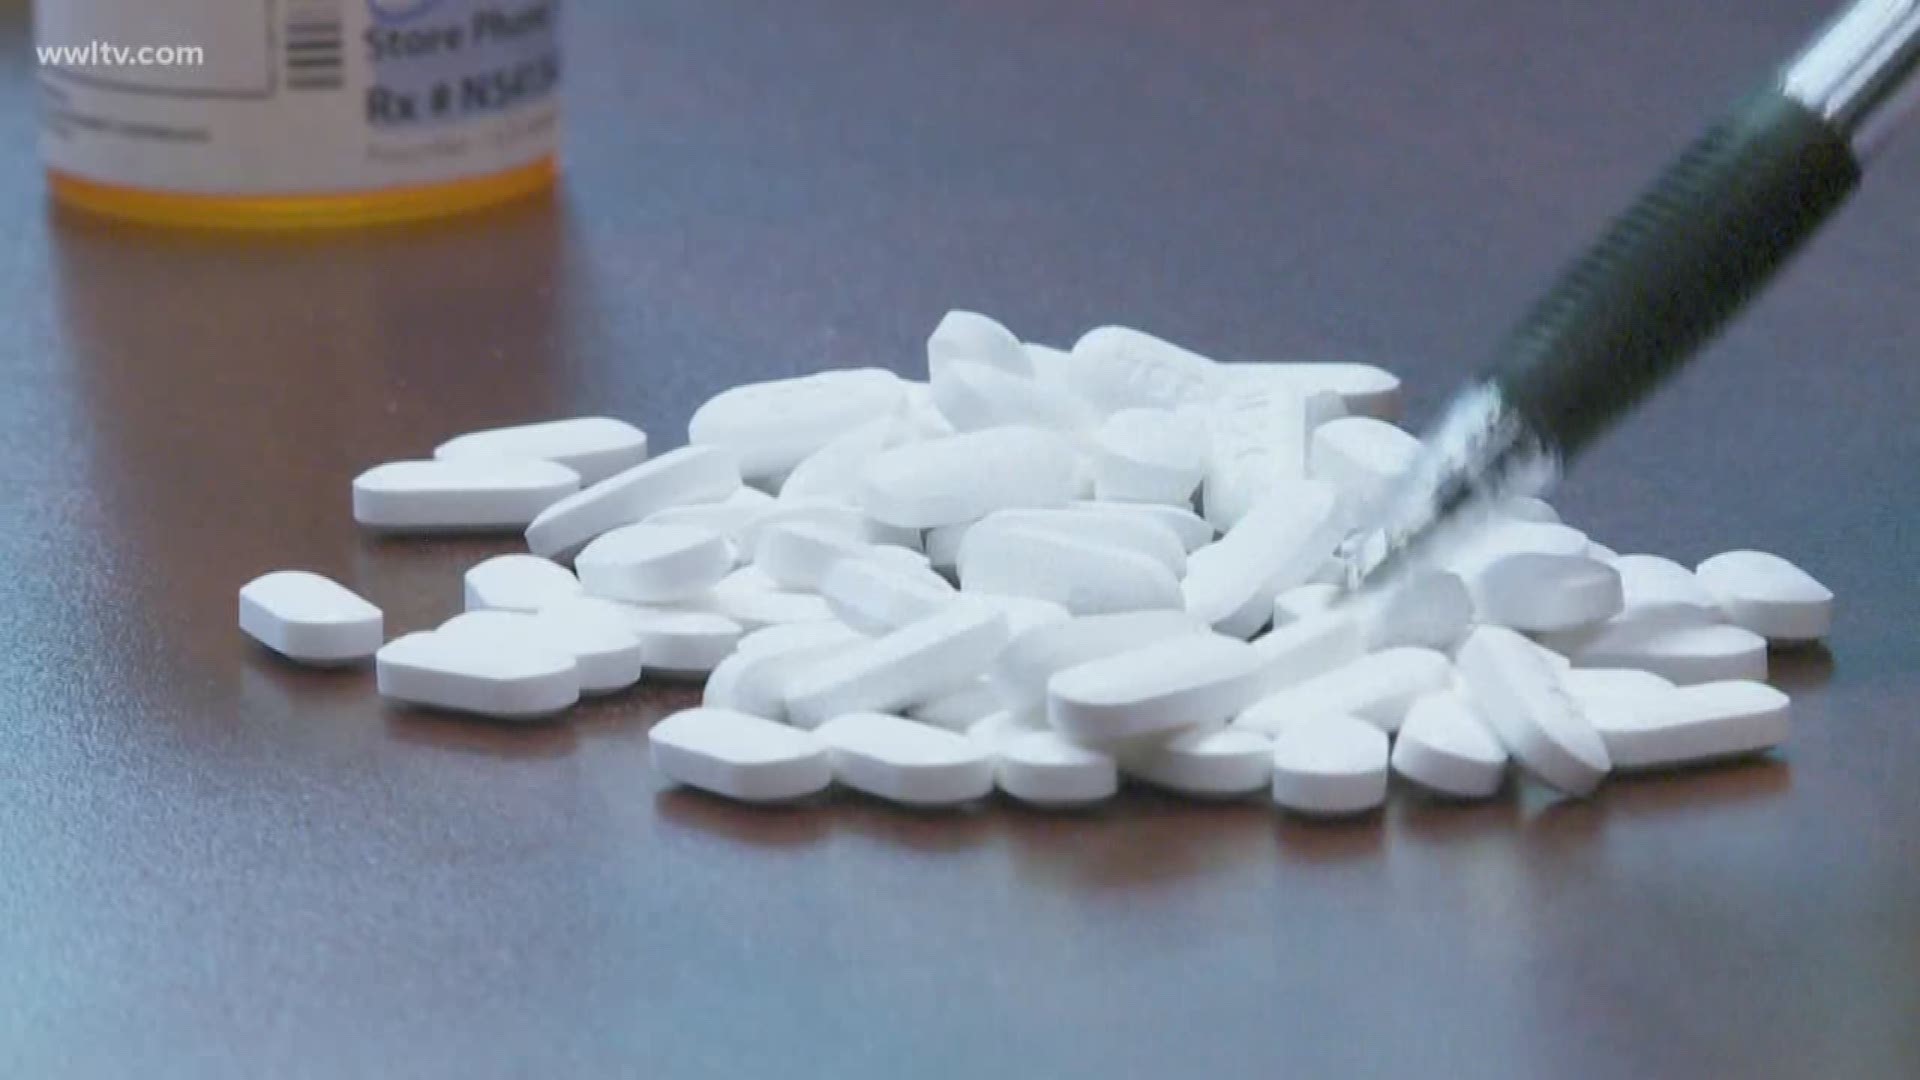 The state department says in 2016, at least 561 deaths statewide involved the presence of opioids. 